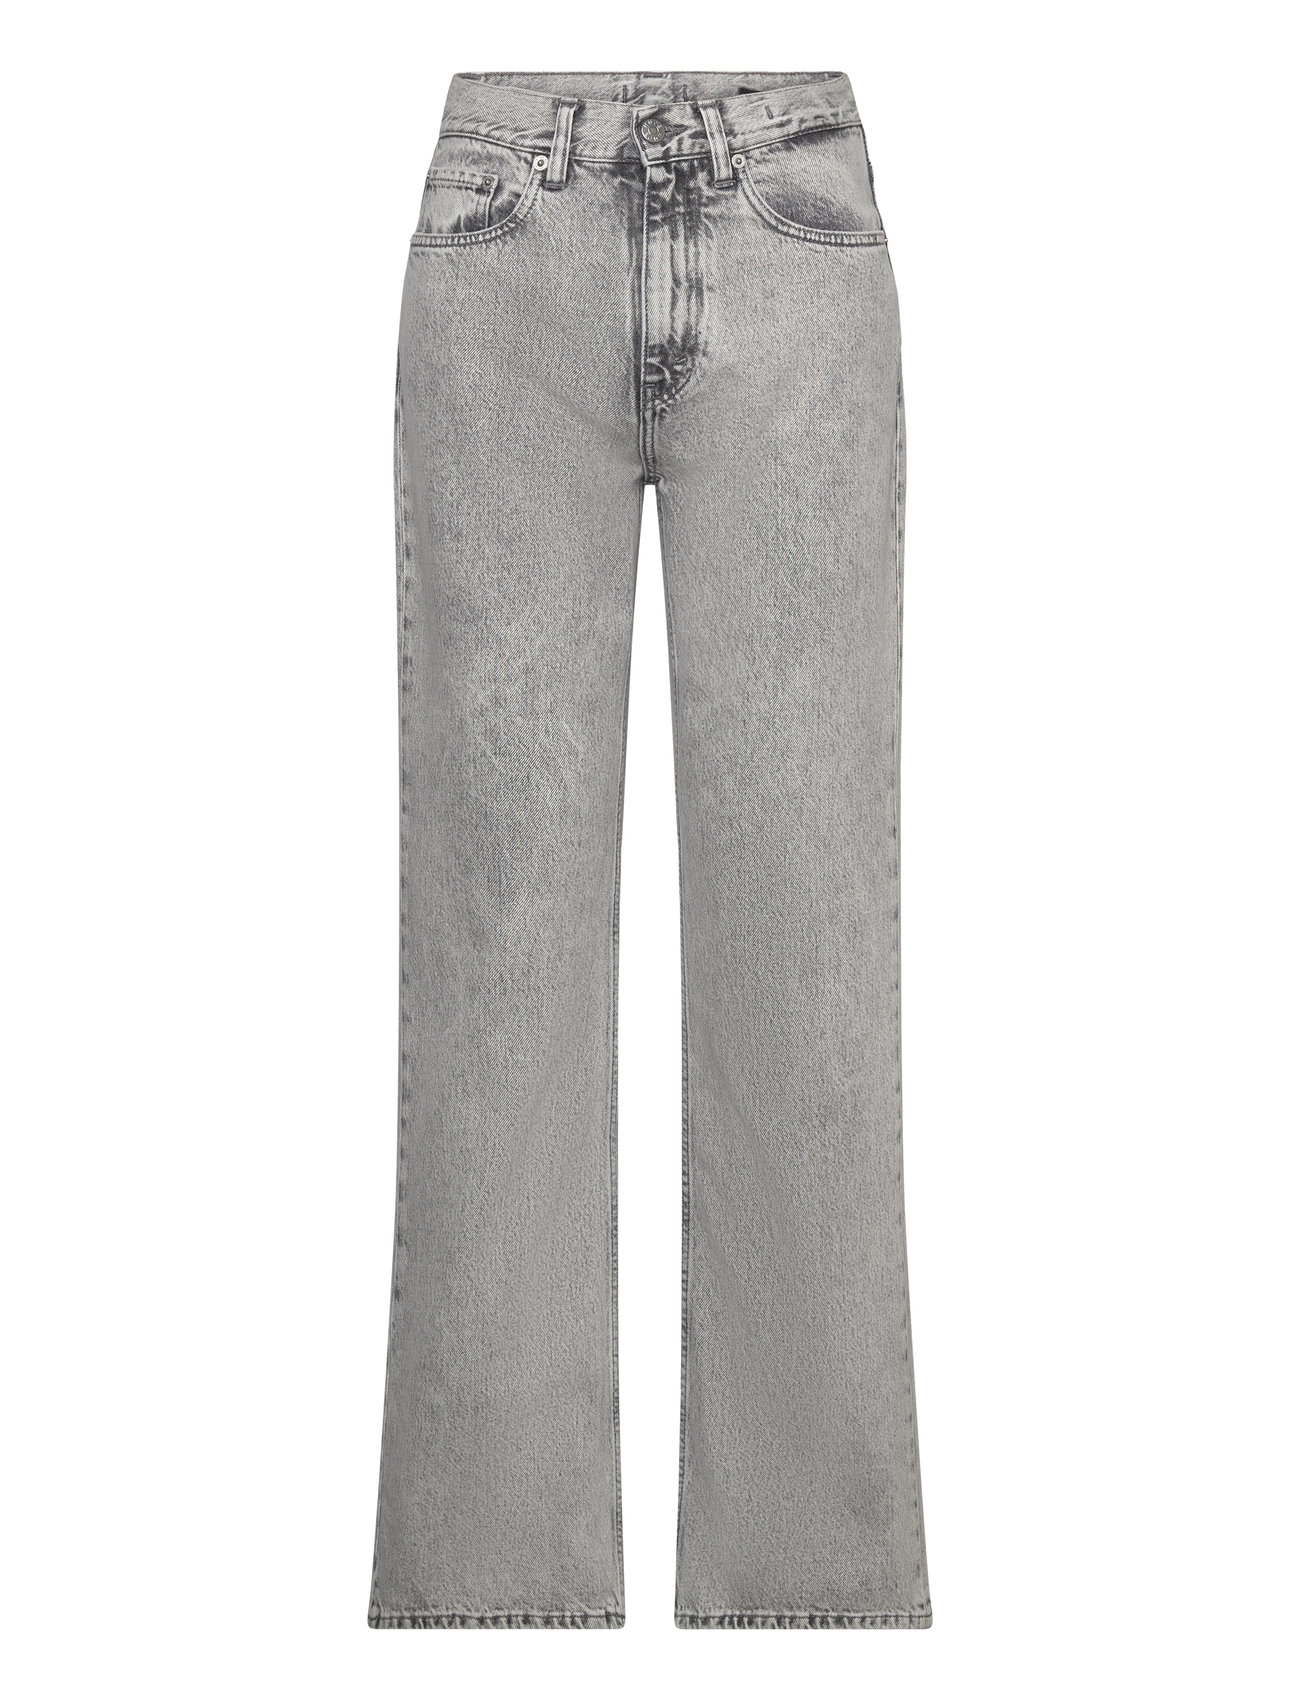 Bootcut Jeans Designers Jeans Flares Grey Hope